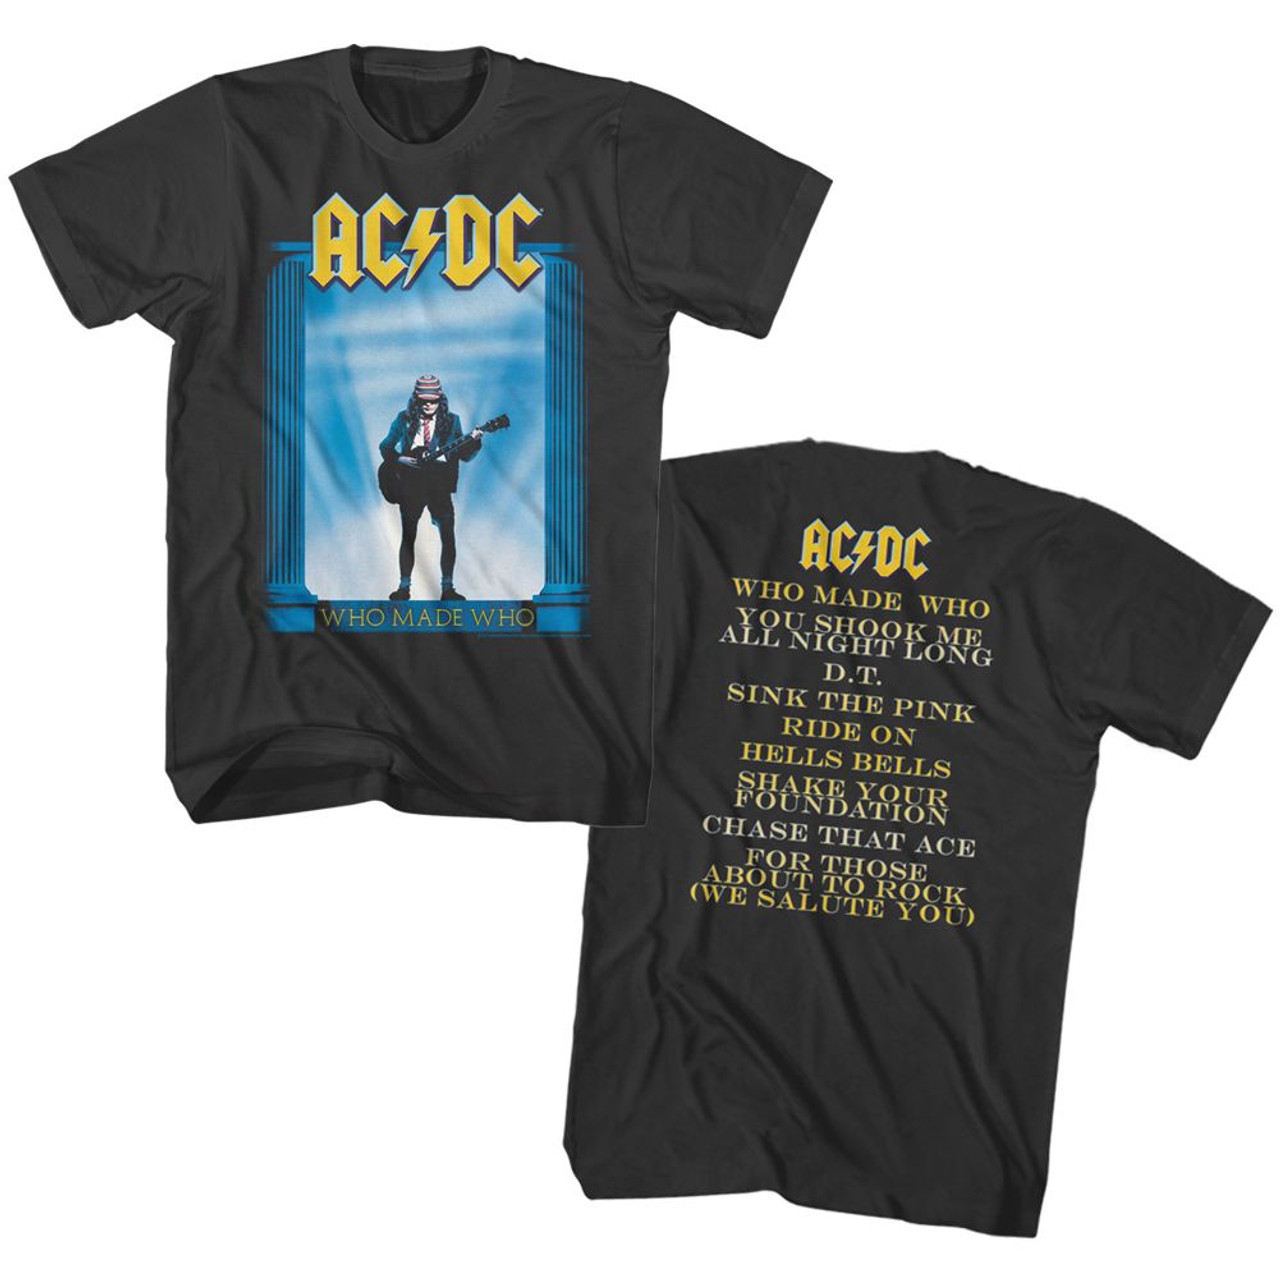 AC/DC Made Who T-Shirt - Old School Tees